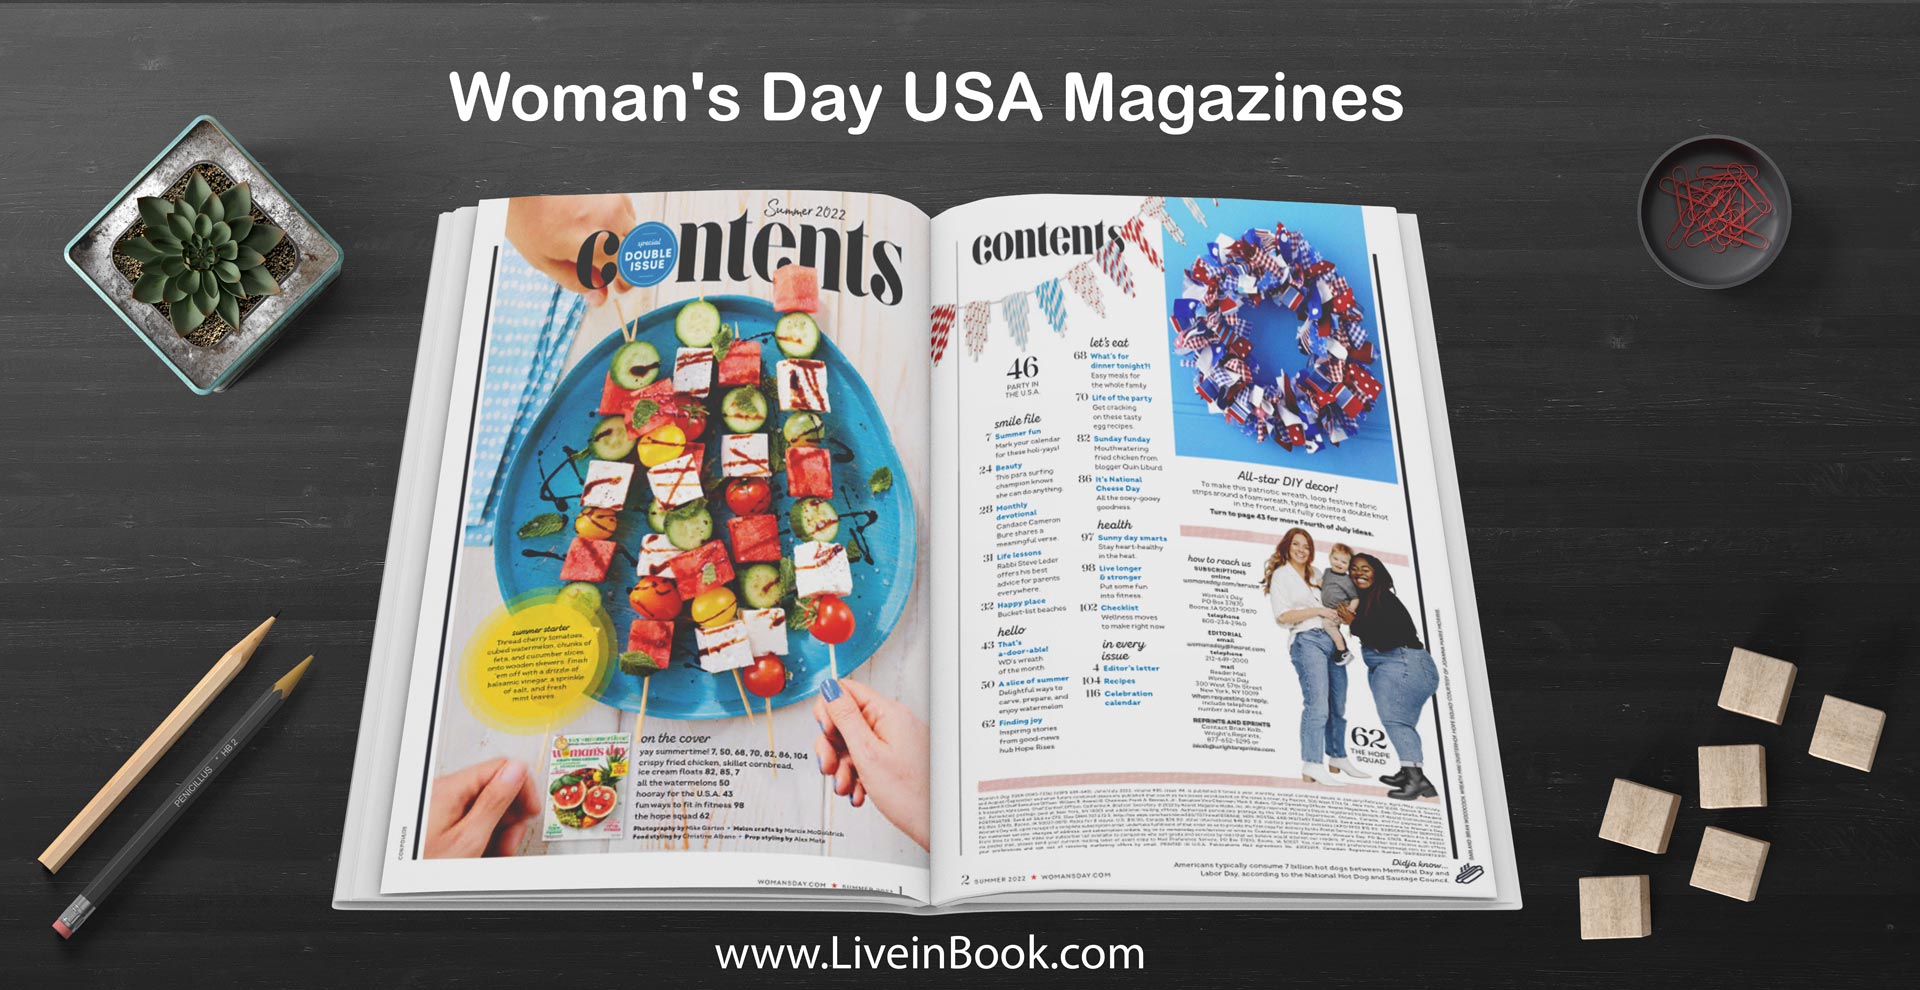 Is Woman's Day magazine still published?